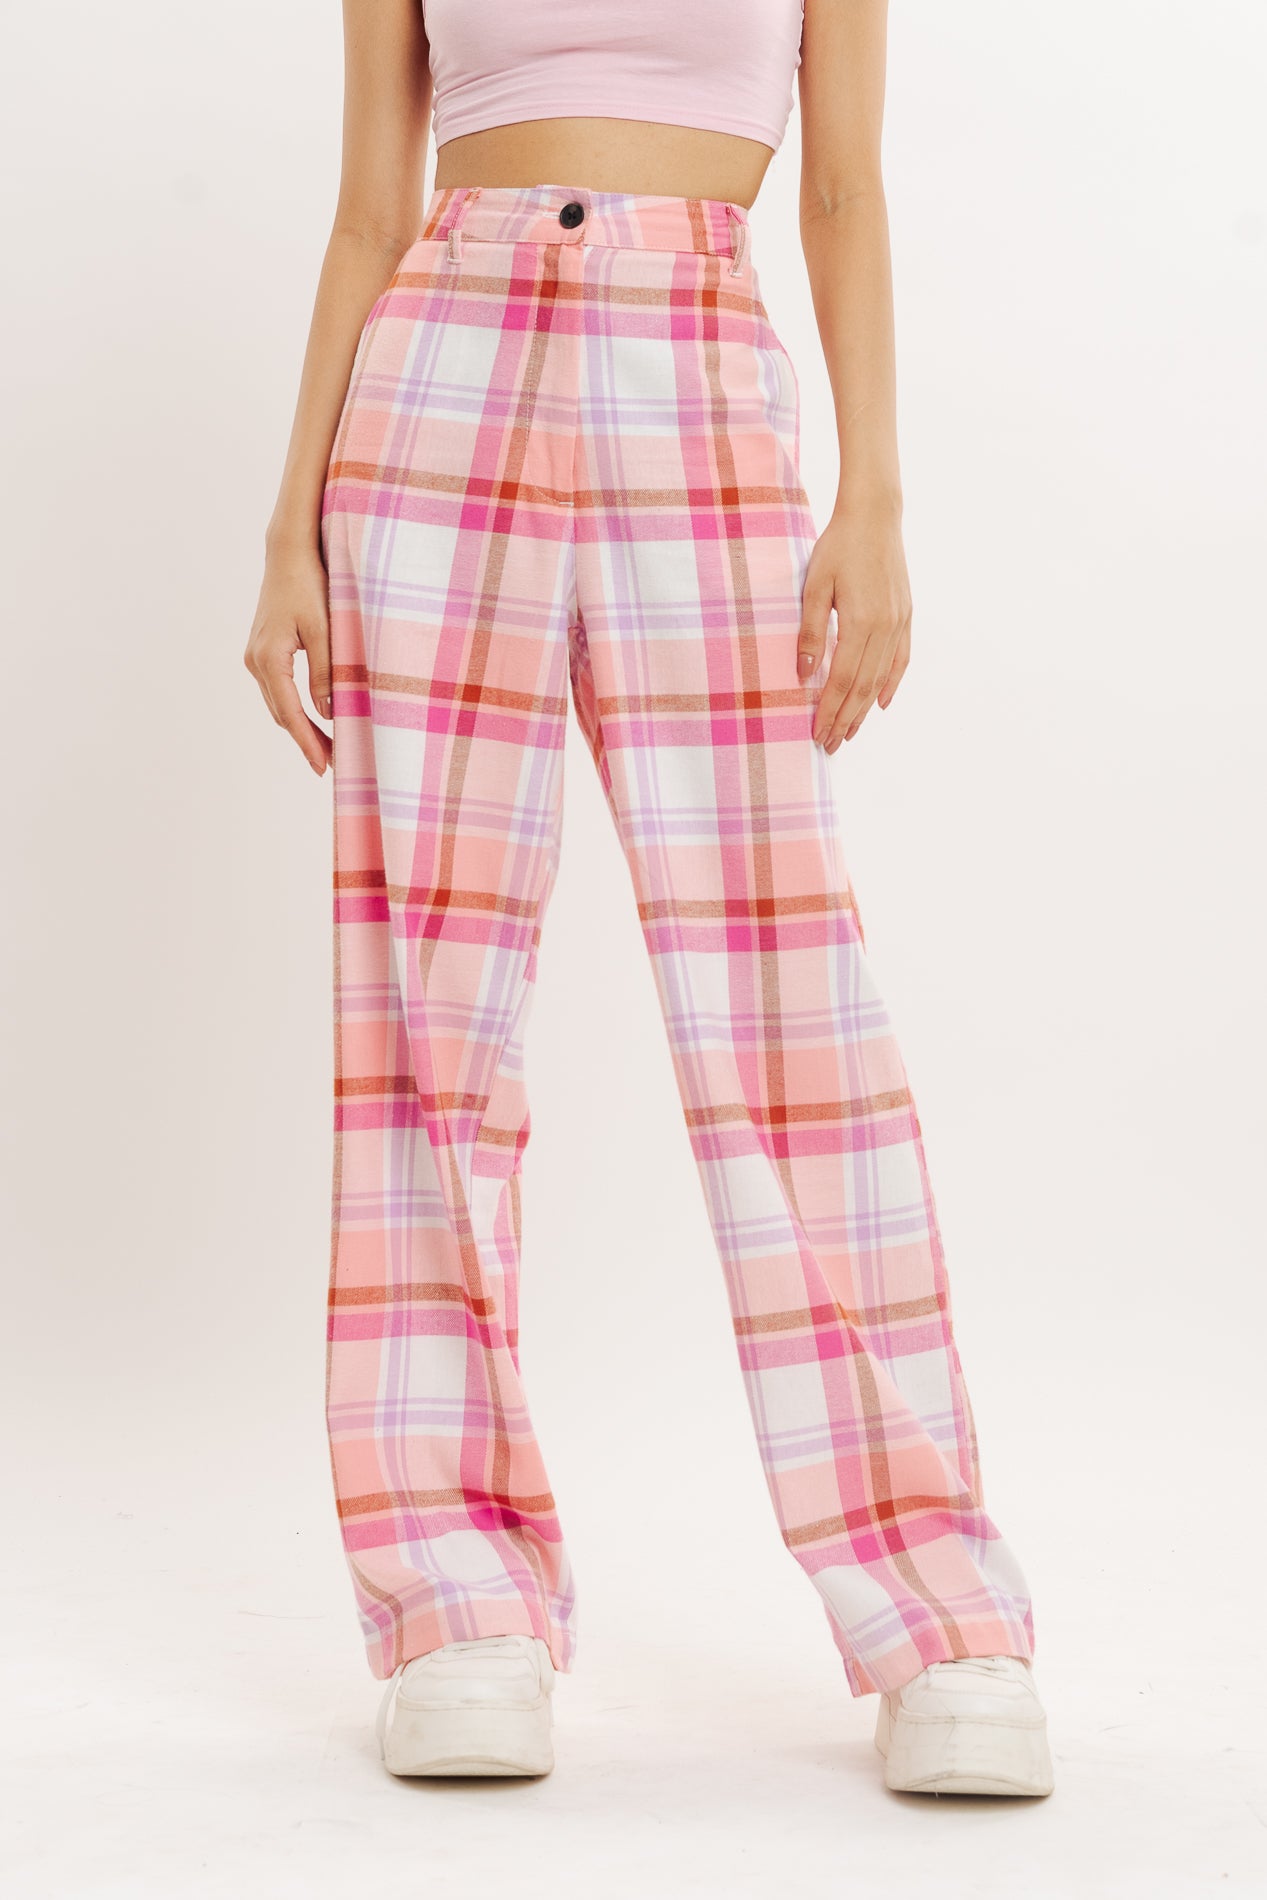 PINK AND WHITE CHECKERED STRAIGHT FIT PANT